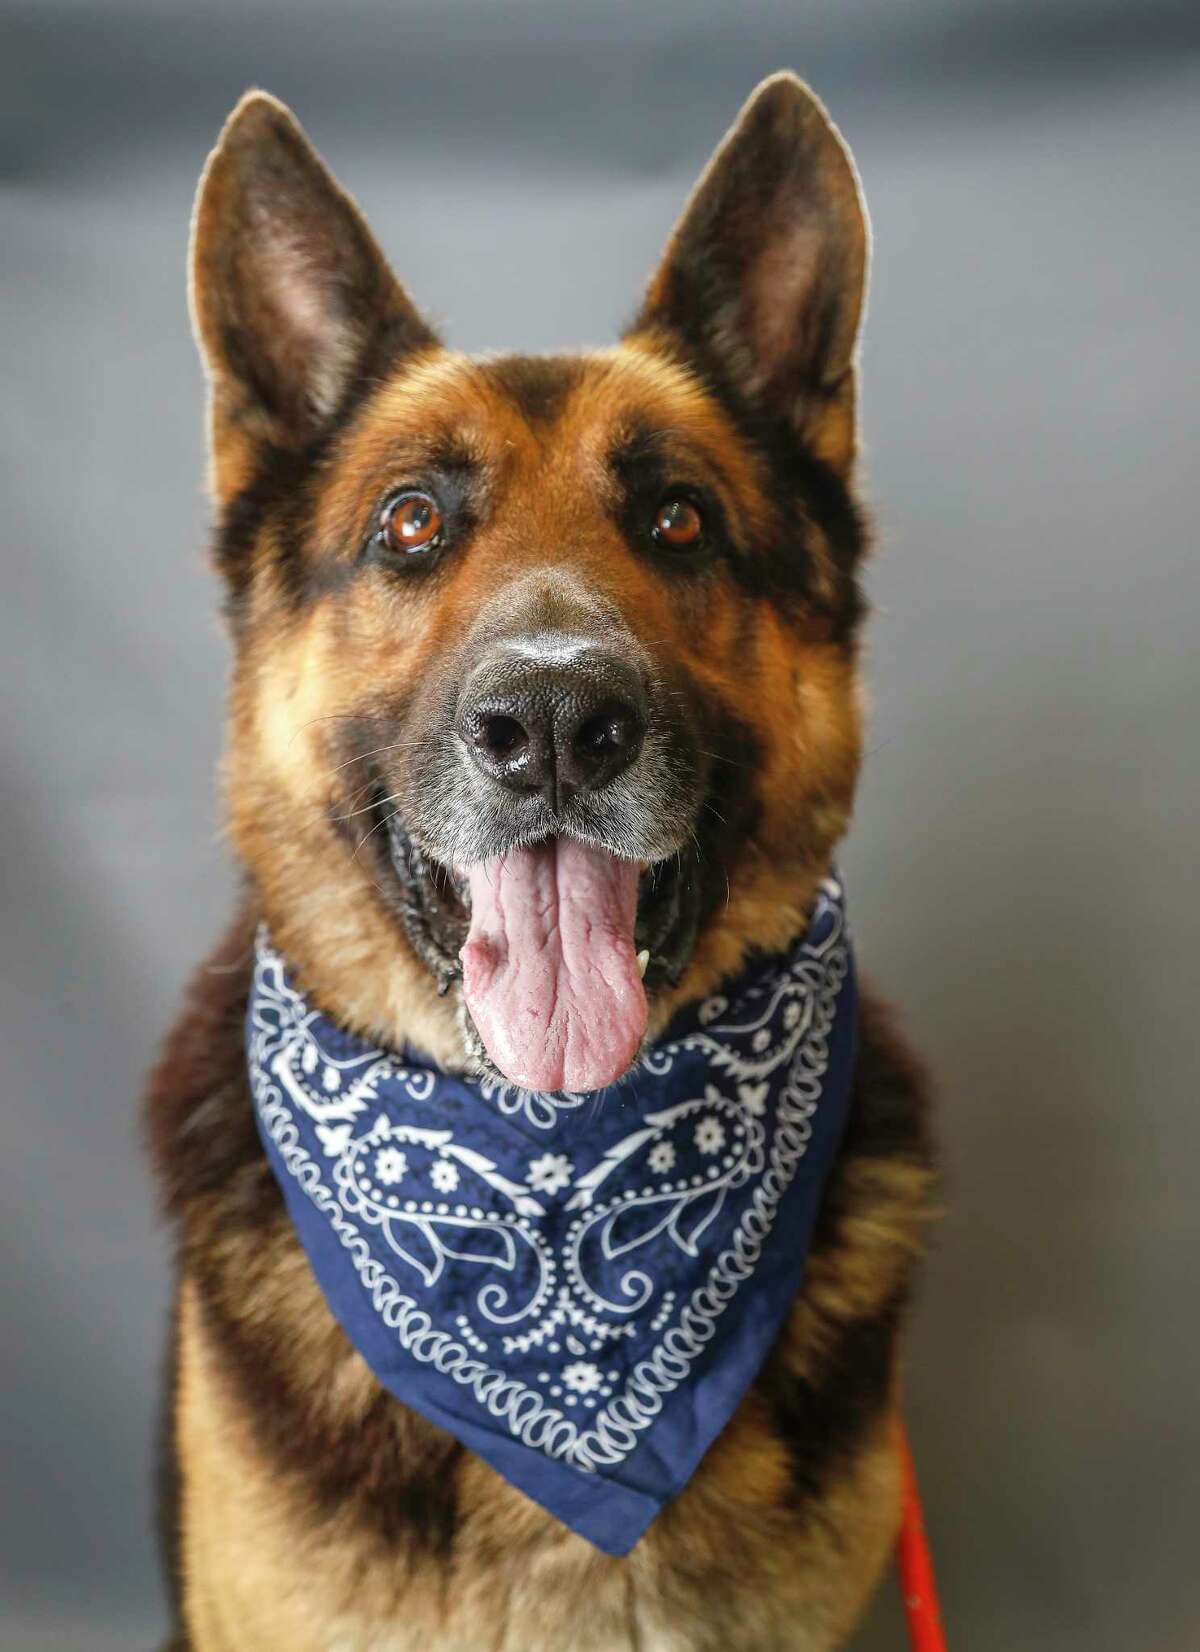 Smash (A1683114) is a 5-year-old, male, German Shepherd mix available for adoption from the BARC Animal Shelter, in Houston,Tuesday, March 10, 2020. Smash is a big love bug! He was left behind after eviction.